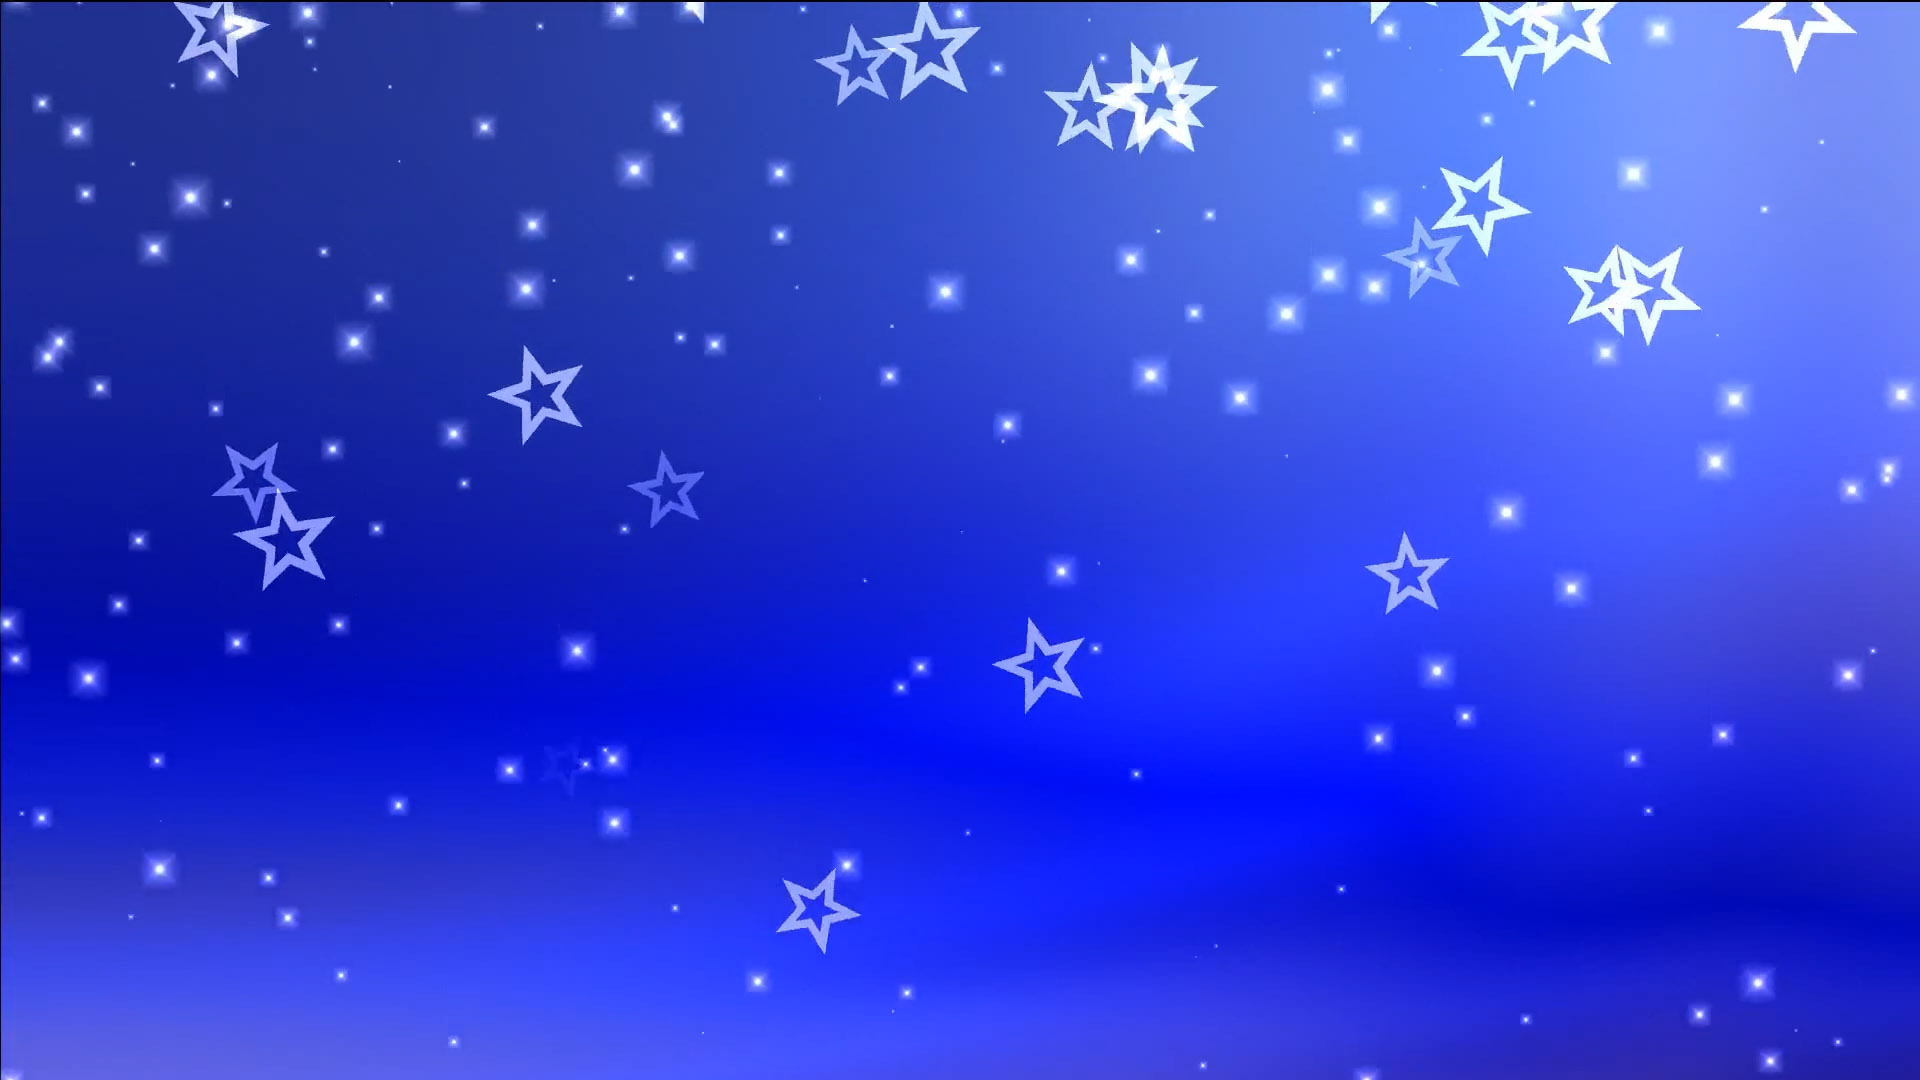 Buy animated falling ☆ stars & particles video on blue background.